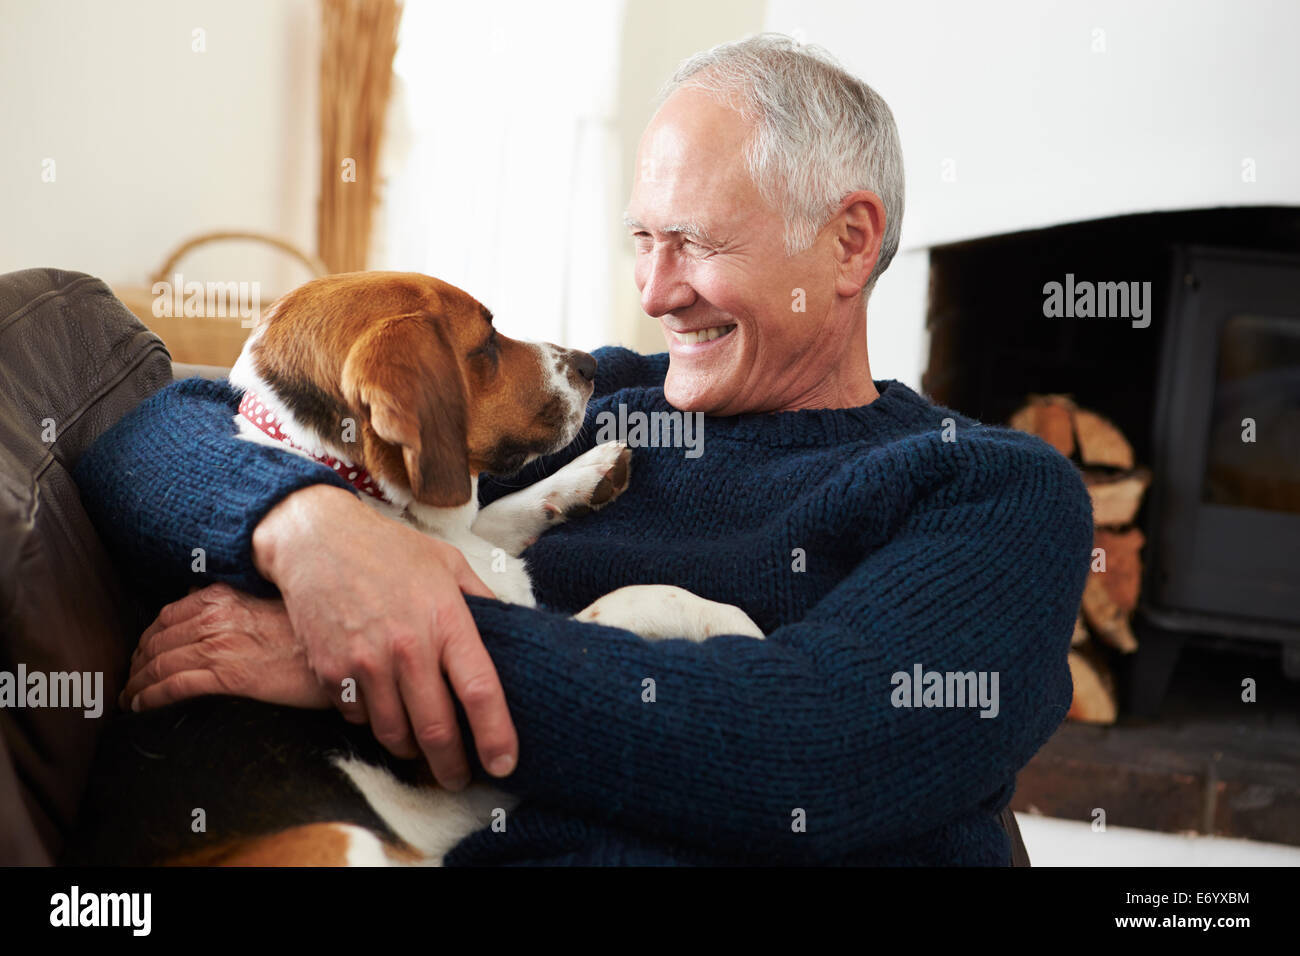 Senior Man Relaxing At Home With Pet Dog Stock Photo